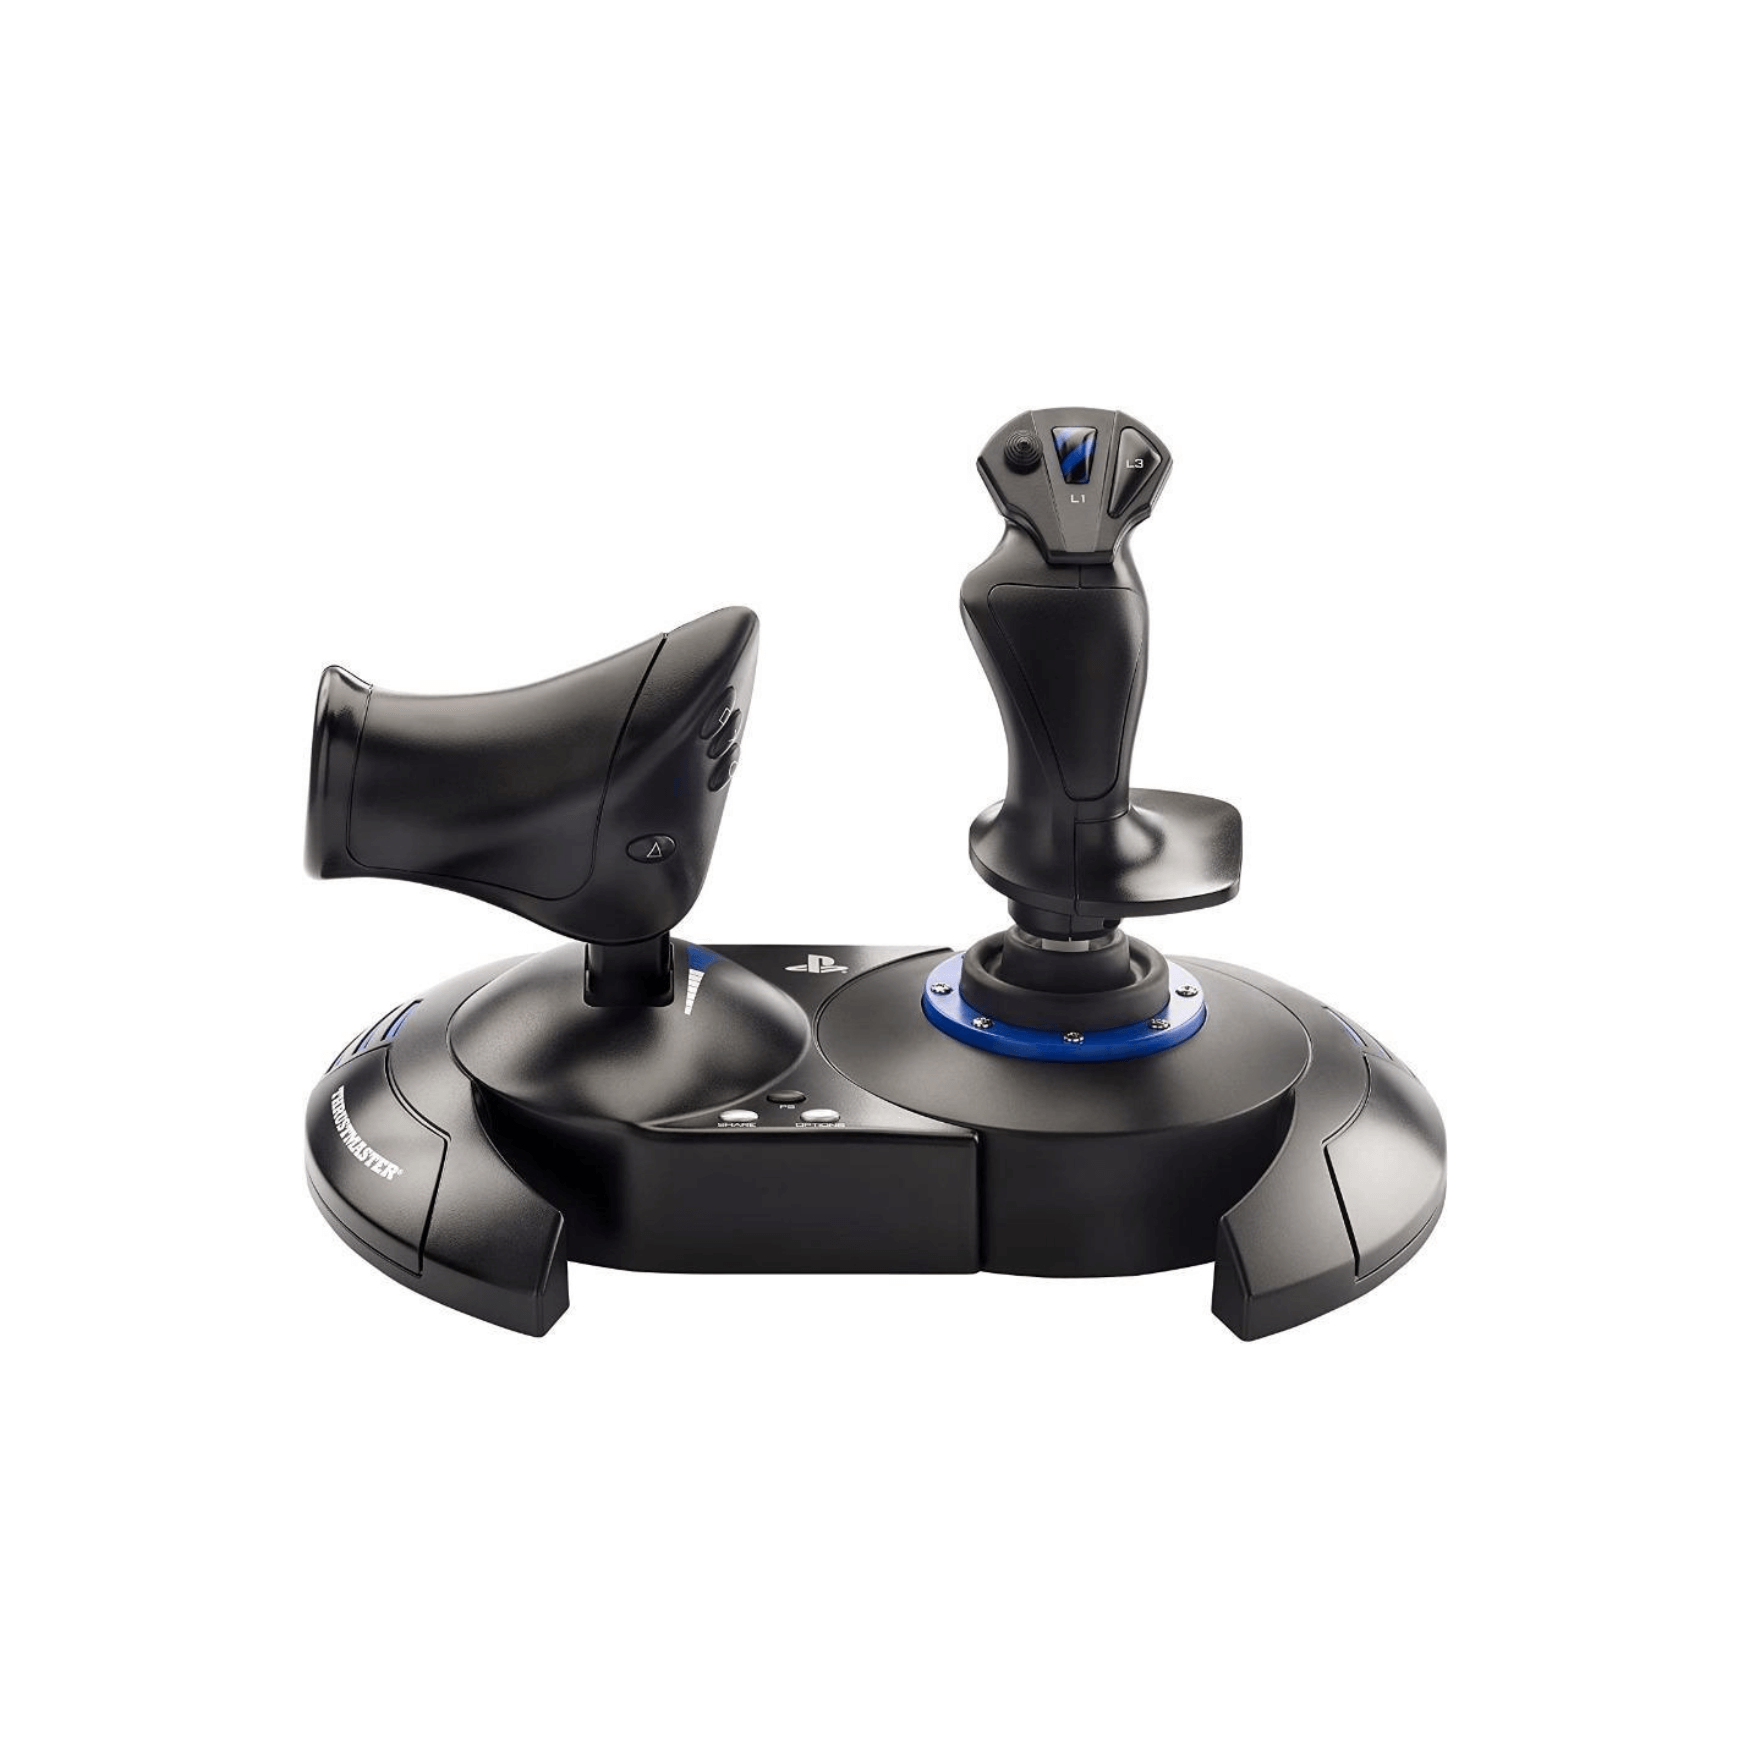 Thrustmaster T.Flight Hotas 4 Racing Gaming Controller for PC / PS4 (1 Year Warranty)